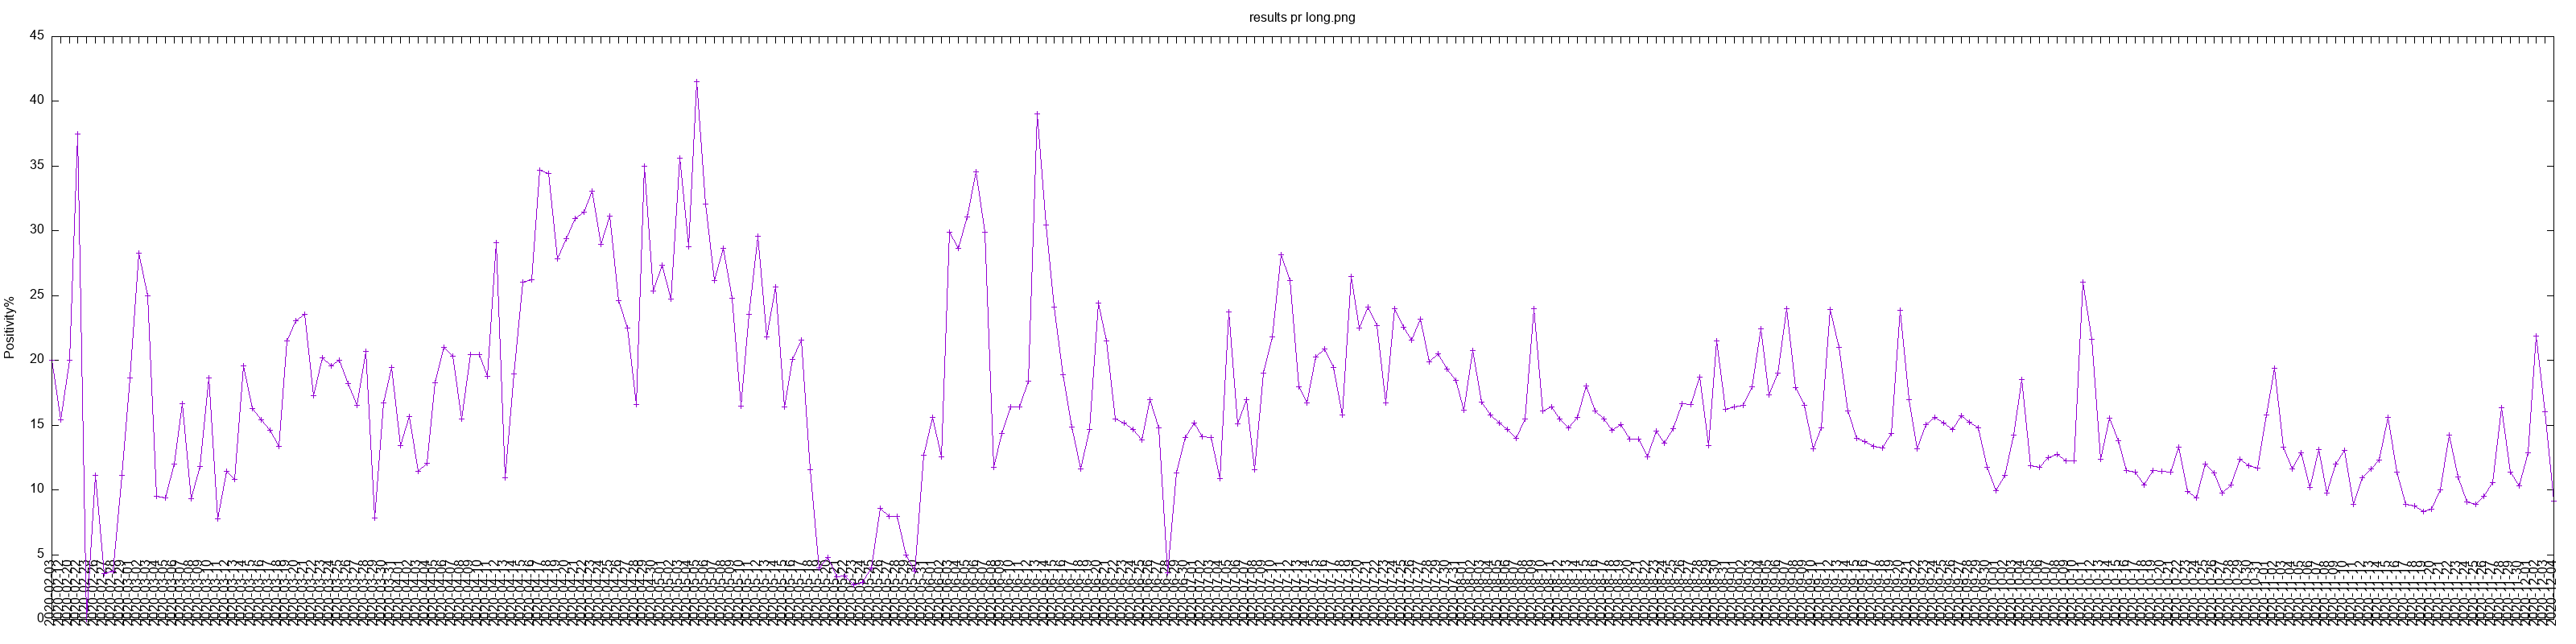 wider graph, same as fig. 1